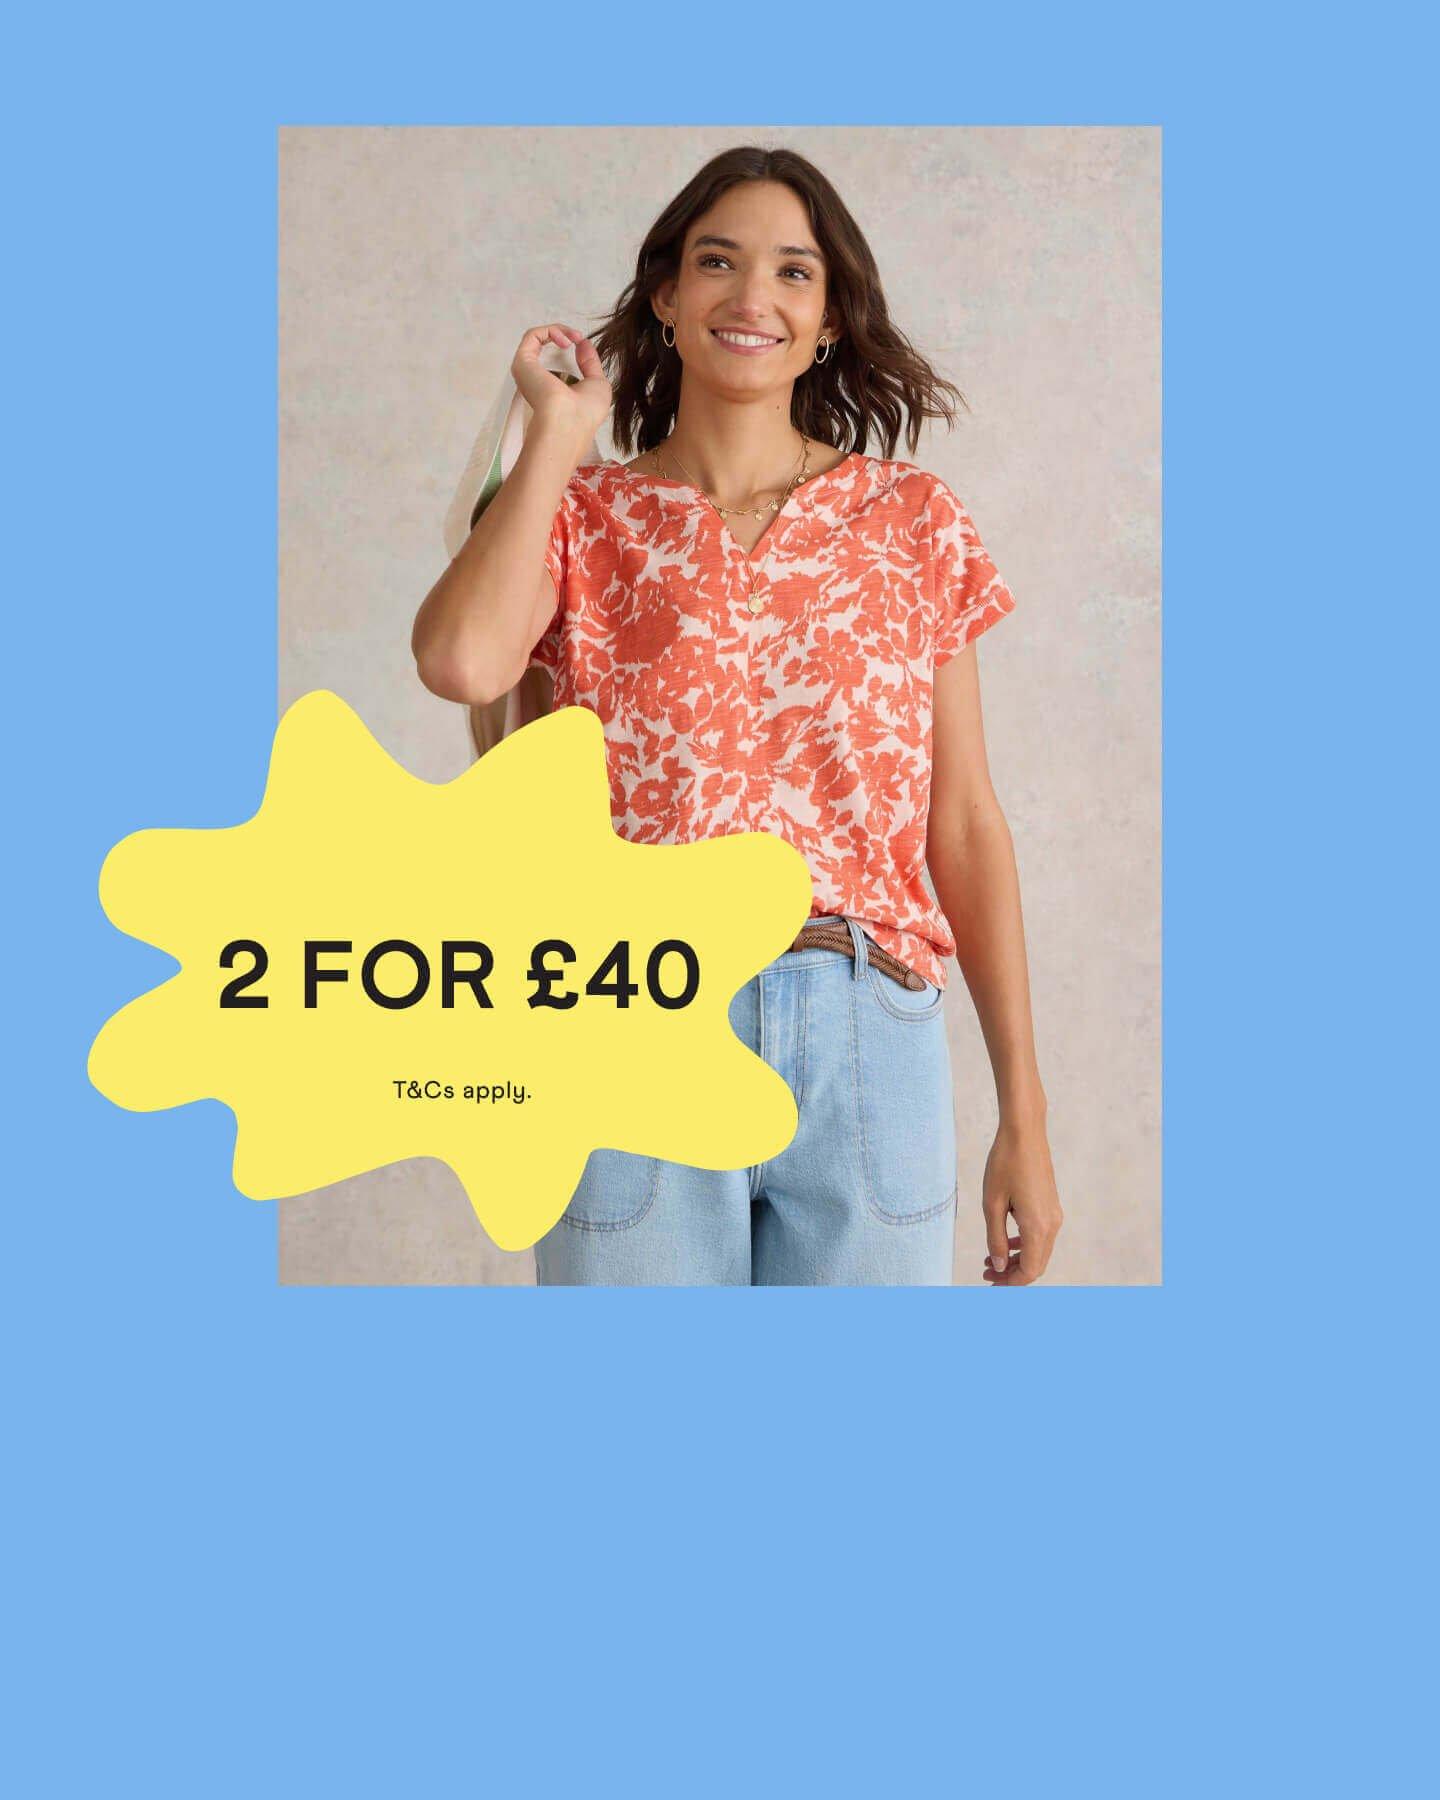 Woman in a orange and white t-shirt with a '2 for £40' promotional banner